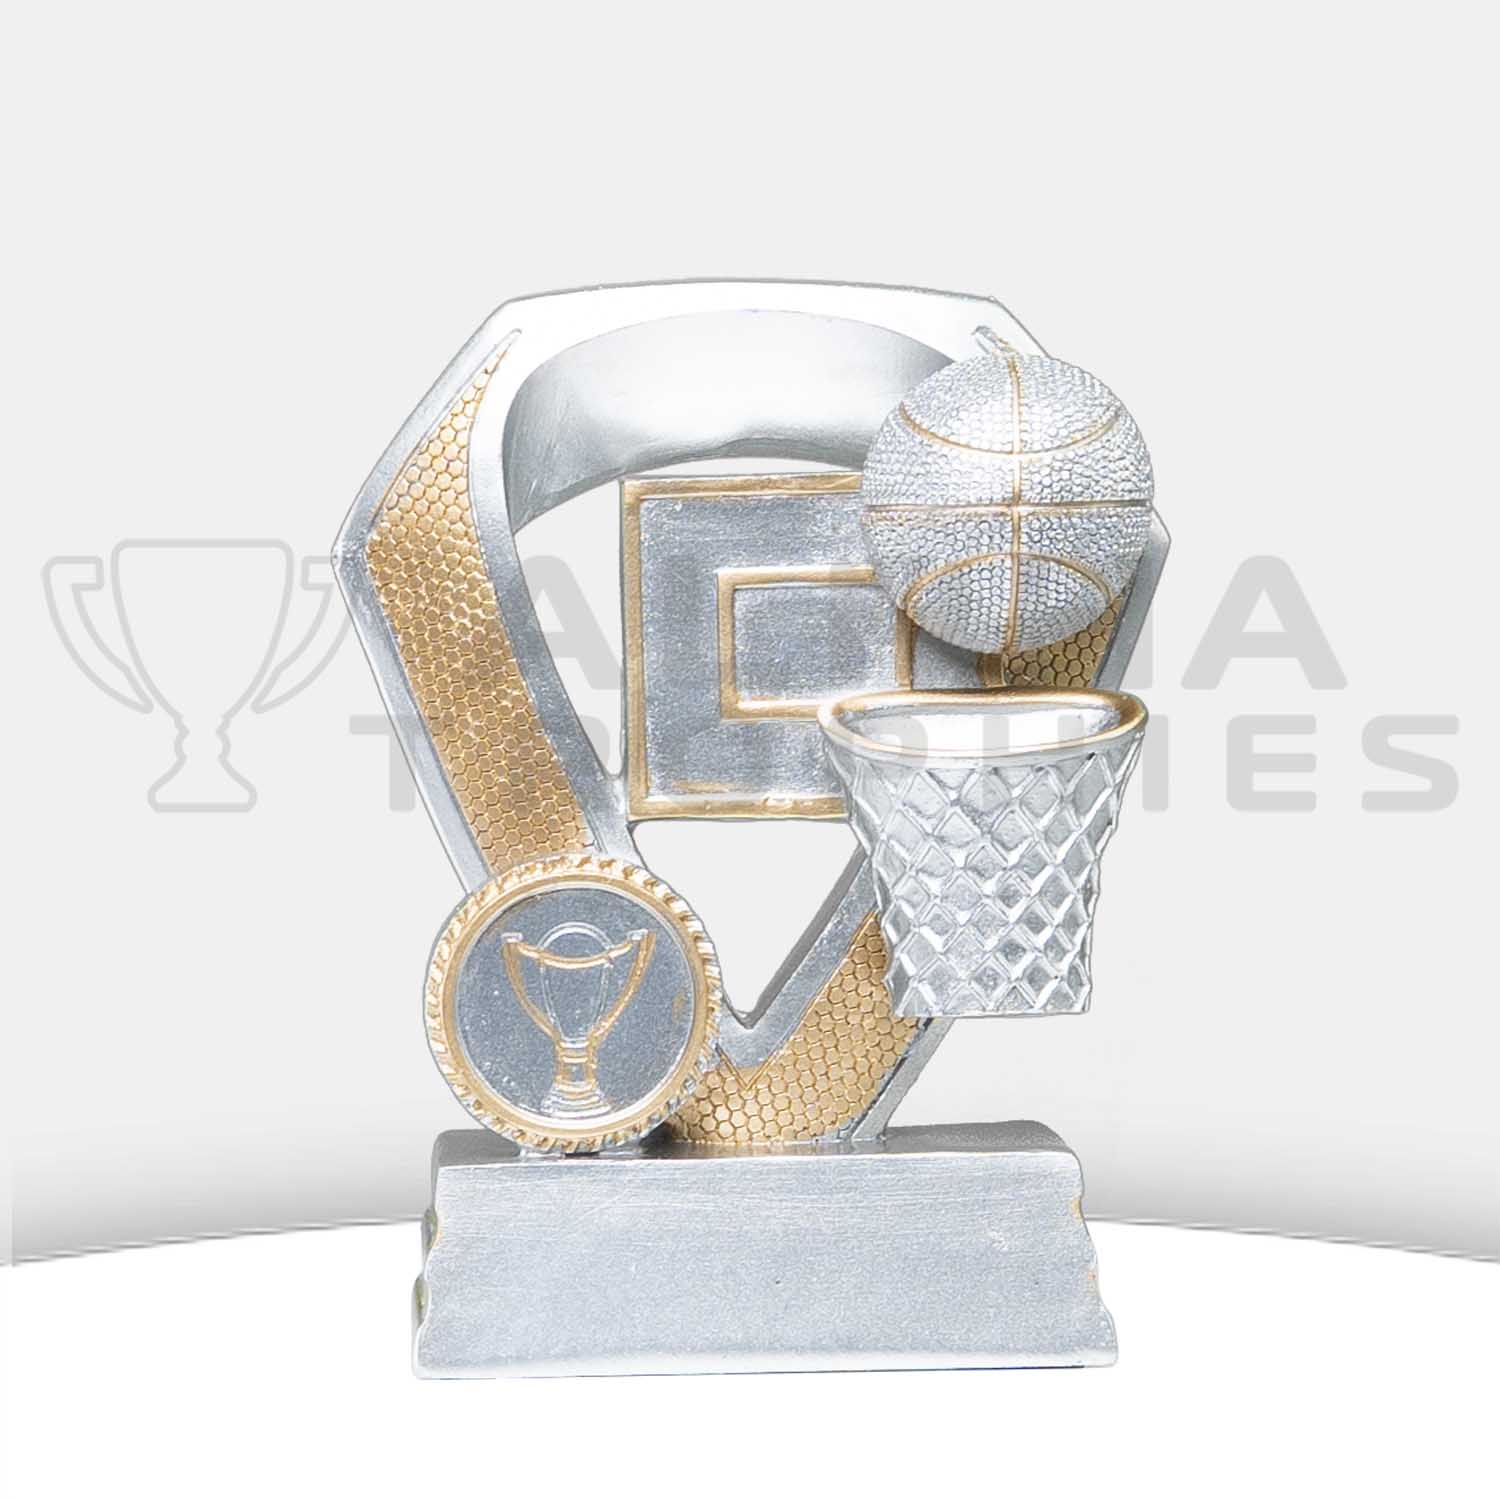 shield-series-basketball-front